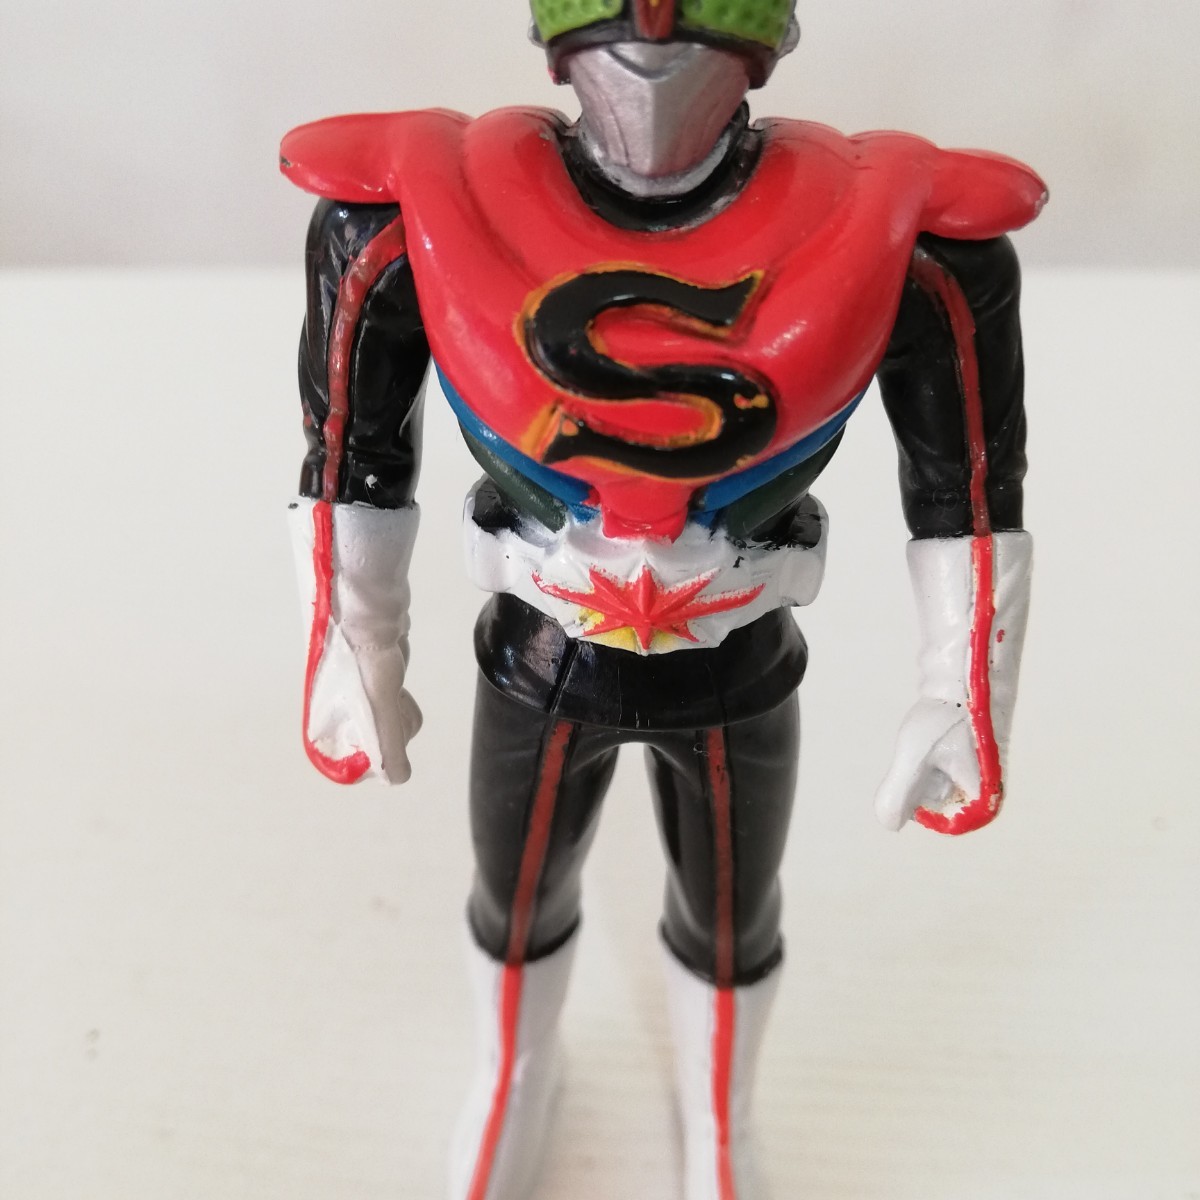 1993 year Vintage Kamen Rider Stronger that time thing figure height 10.3cm [ sofvi doll character ]